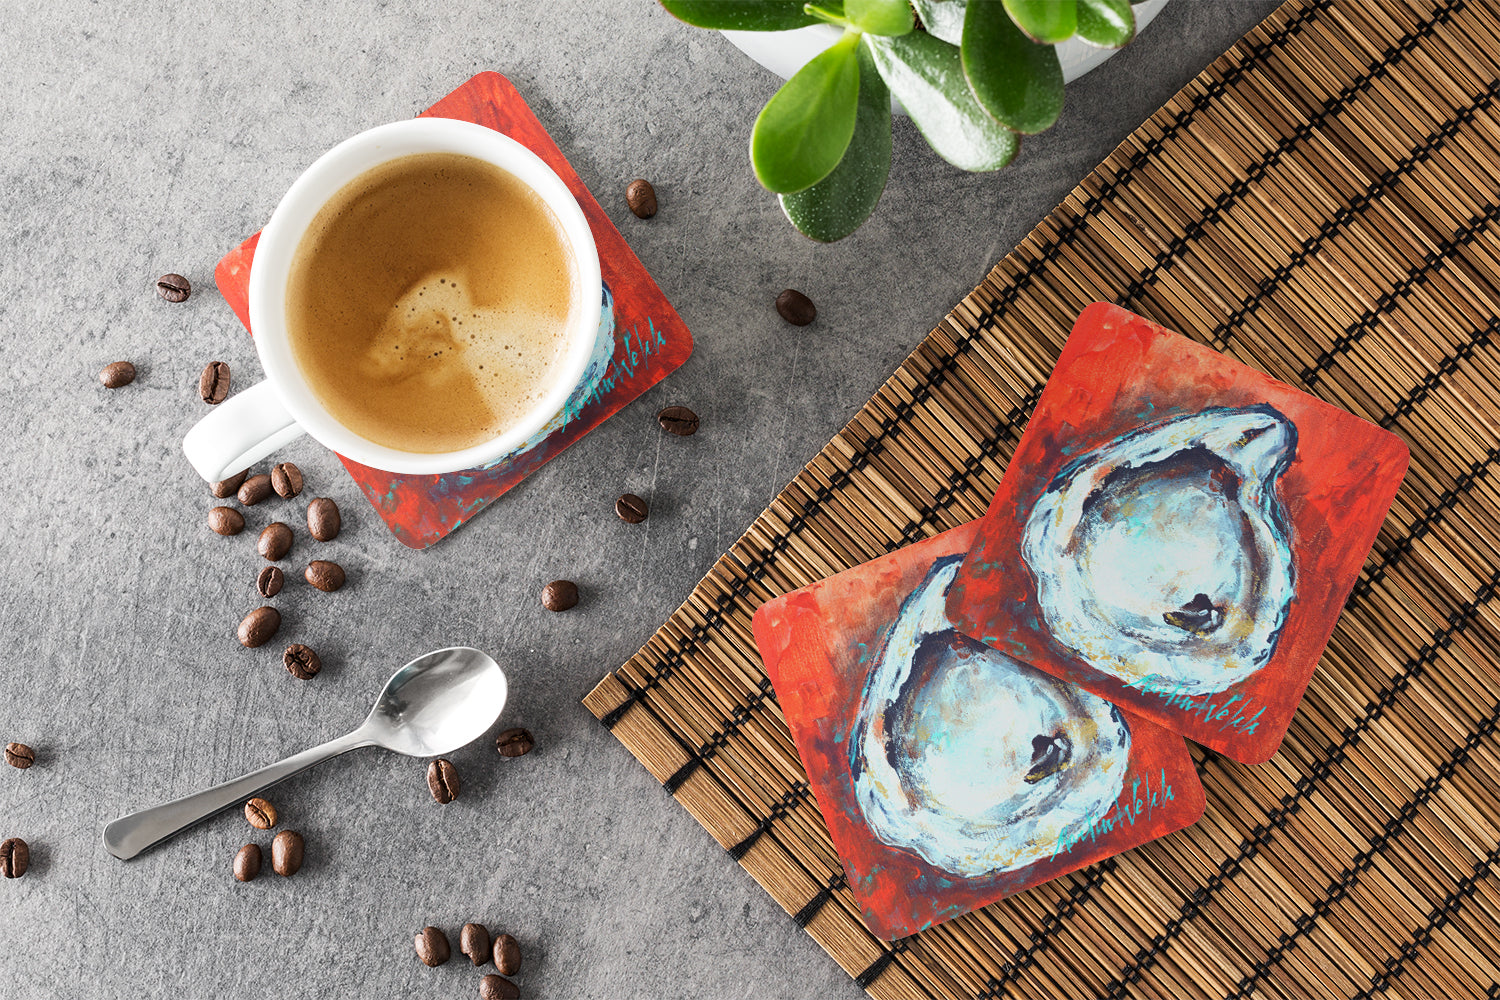 Char Broiled Oyster Foam Coaster Set of 4 MW1321FC - the-store.com